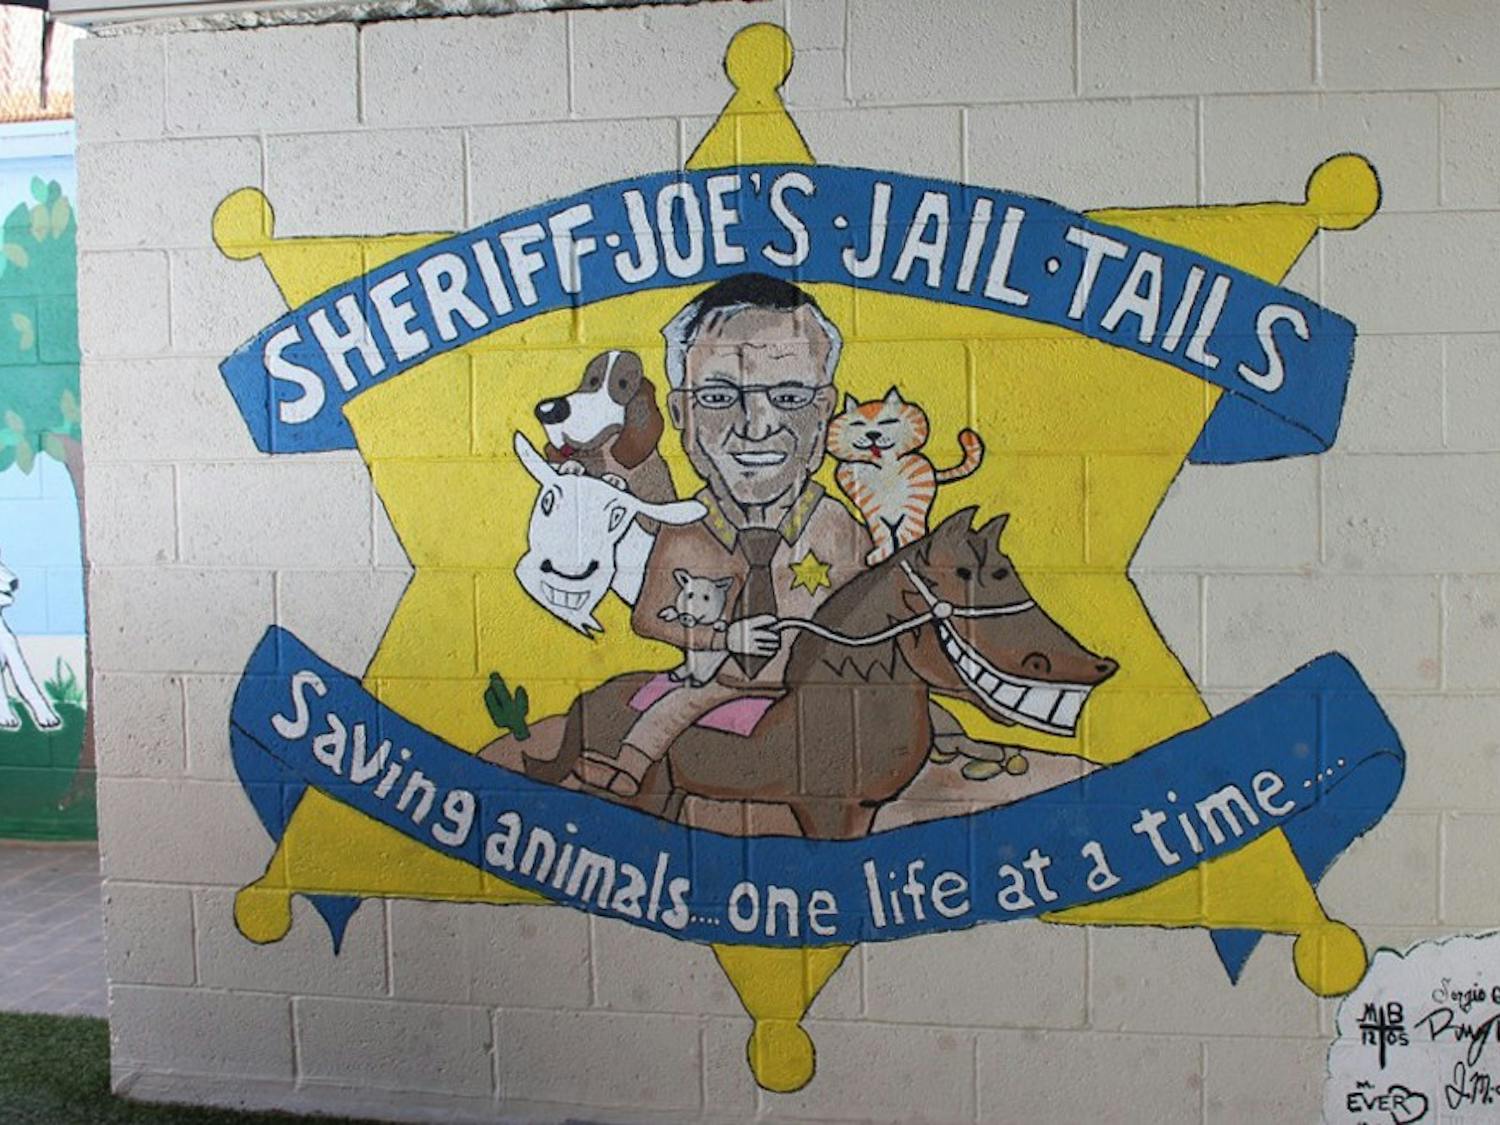 A mural outside of Sheriff Joe Arpaio's animal shelter, MASH, pictured on Thursday, March 31, 2016.